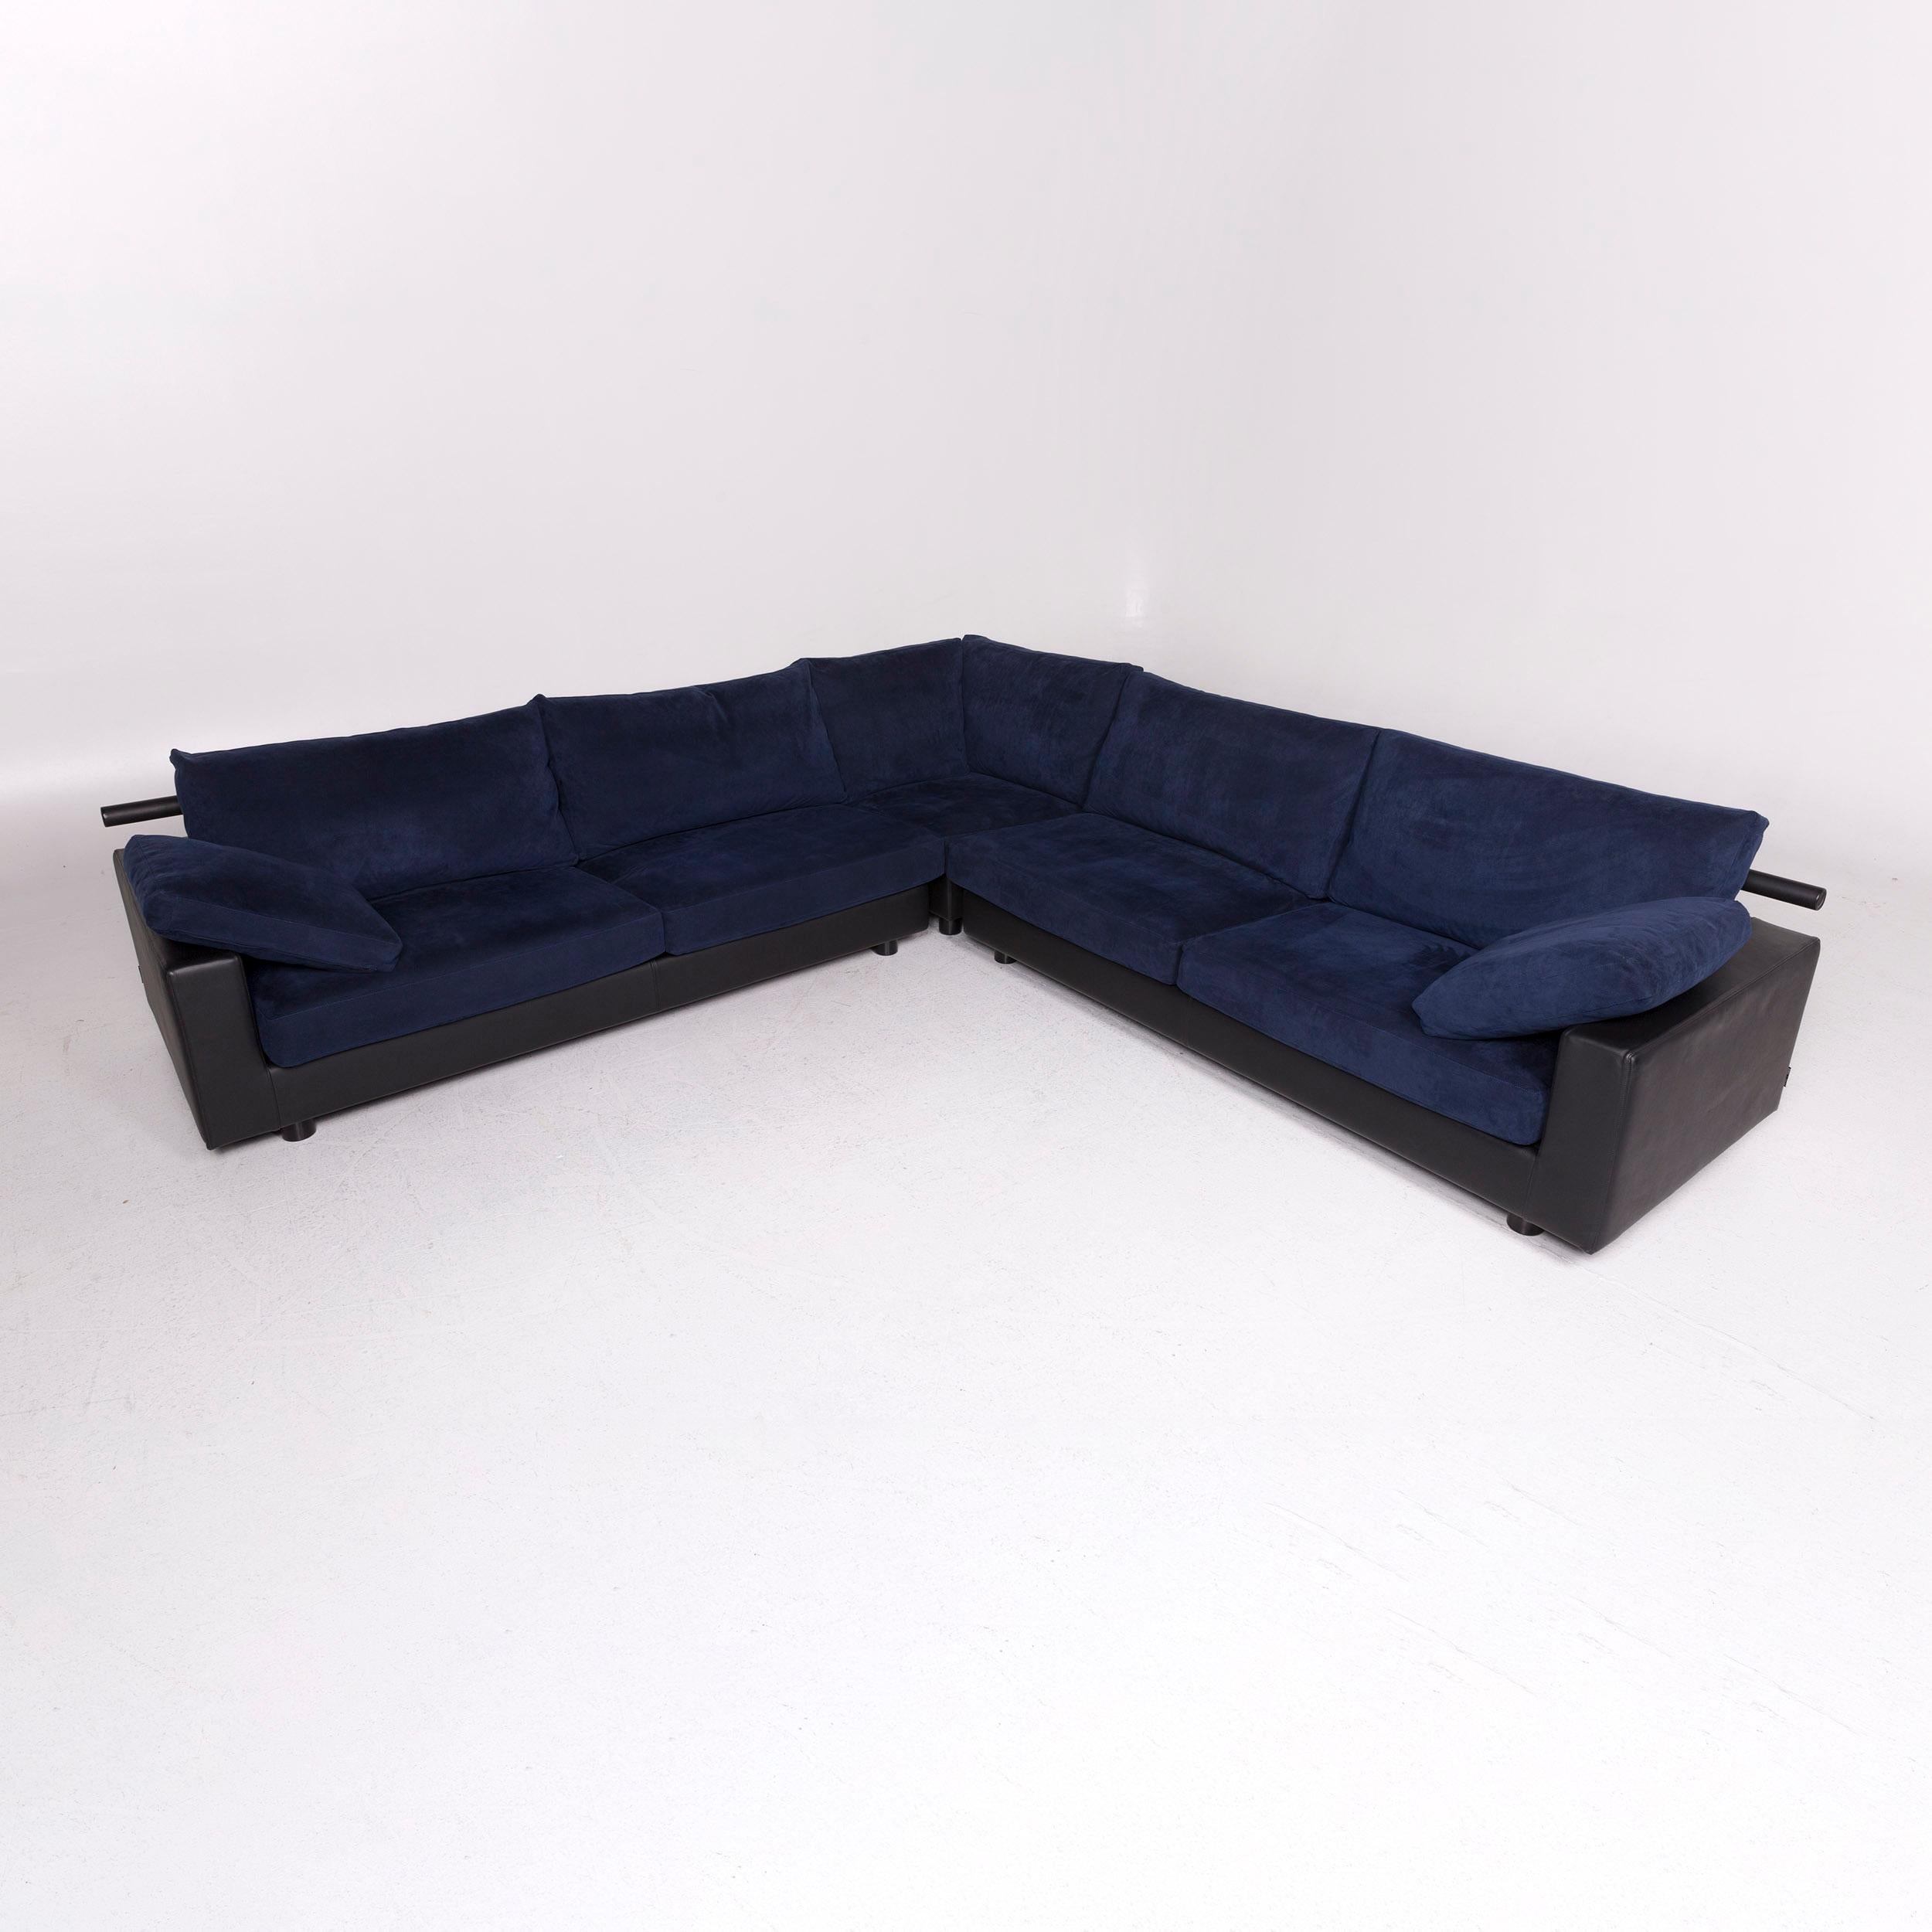 We bring to you a Flexform leather fabric corner sofa blue black sofa couch.

 

 Product measurements in centimeters:
 

Depth 95
Width 300
Height 83
Seat-height 41
Rest-height 60
Seat-depth 52
Seat-width 245
Back-height 36.